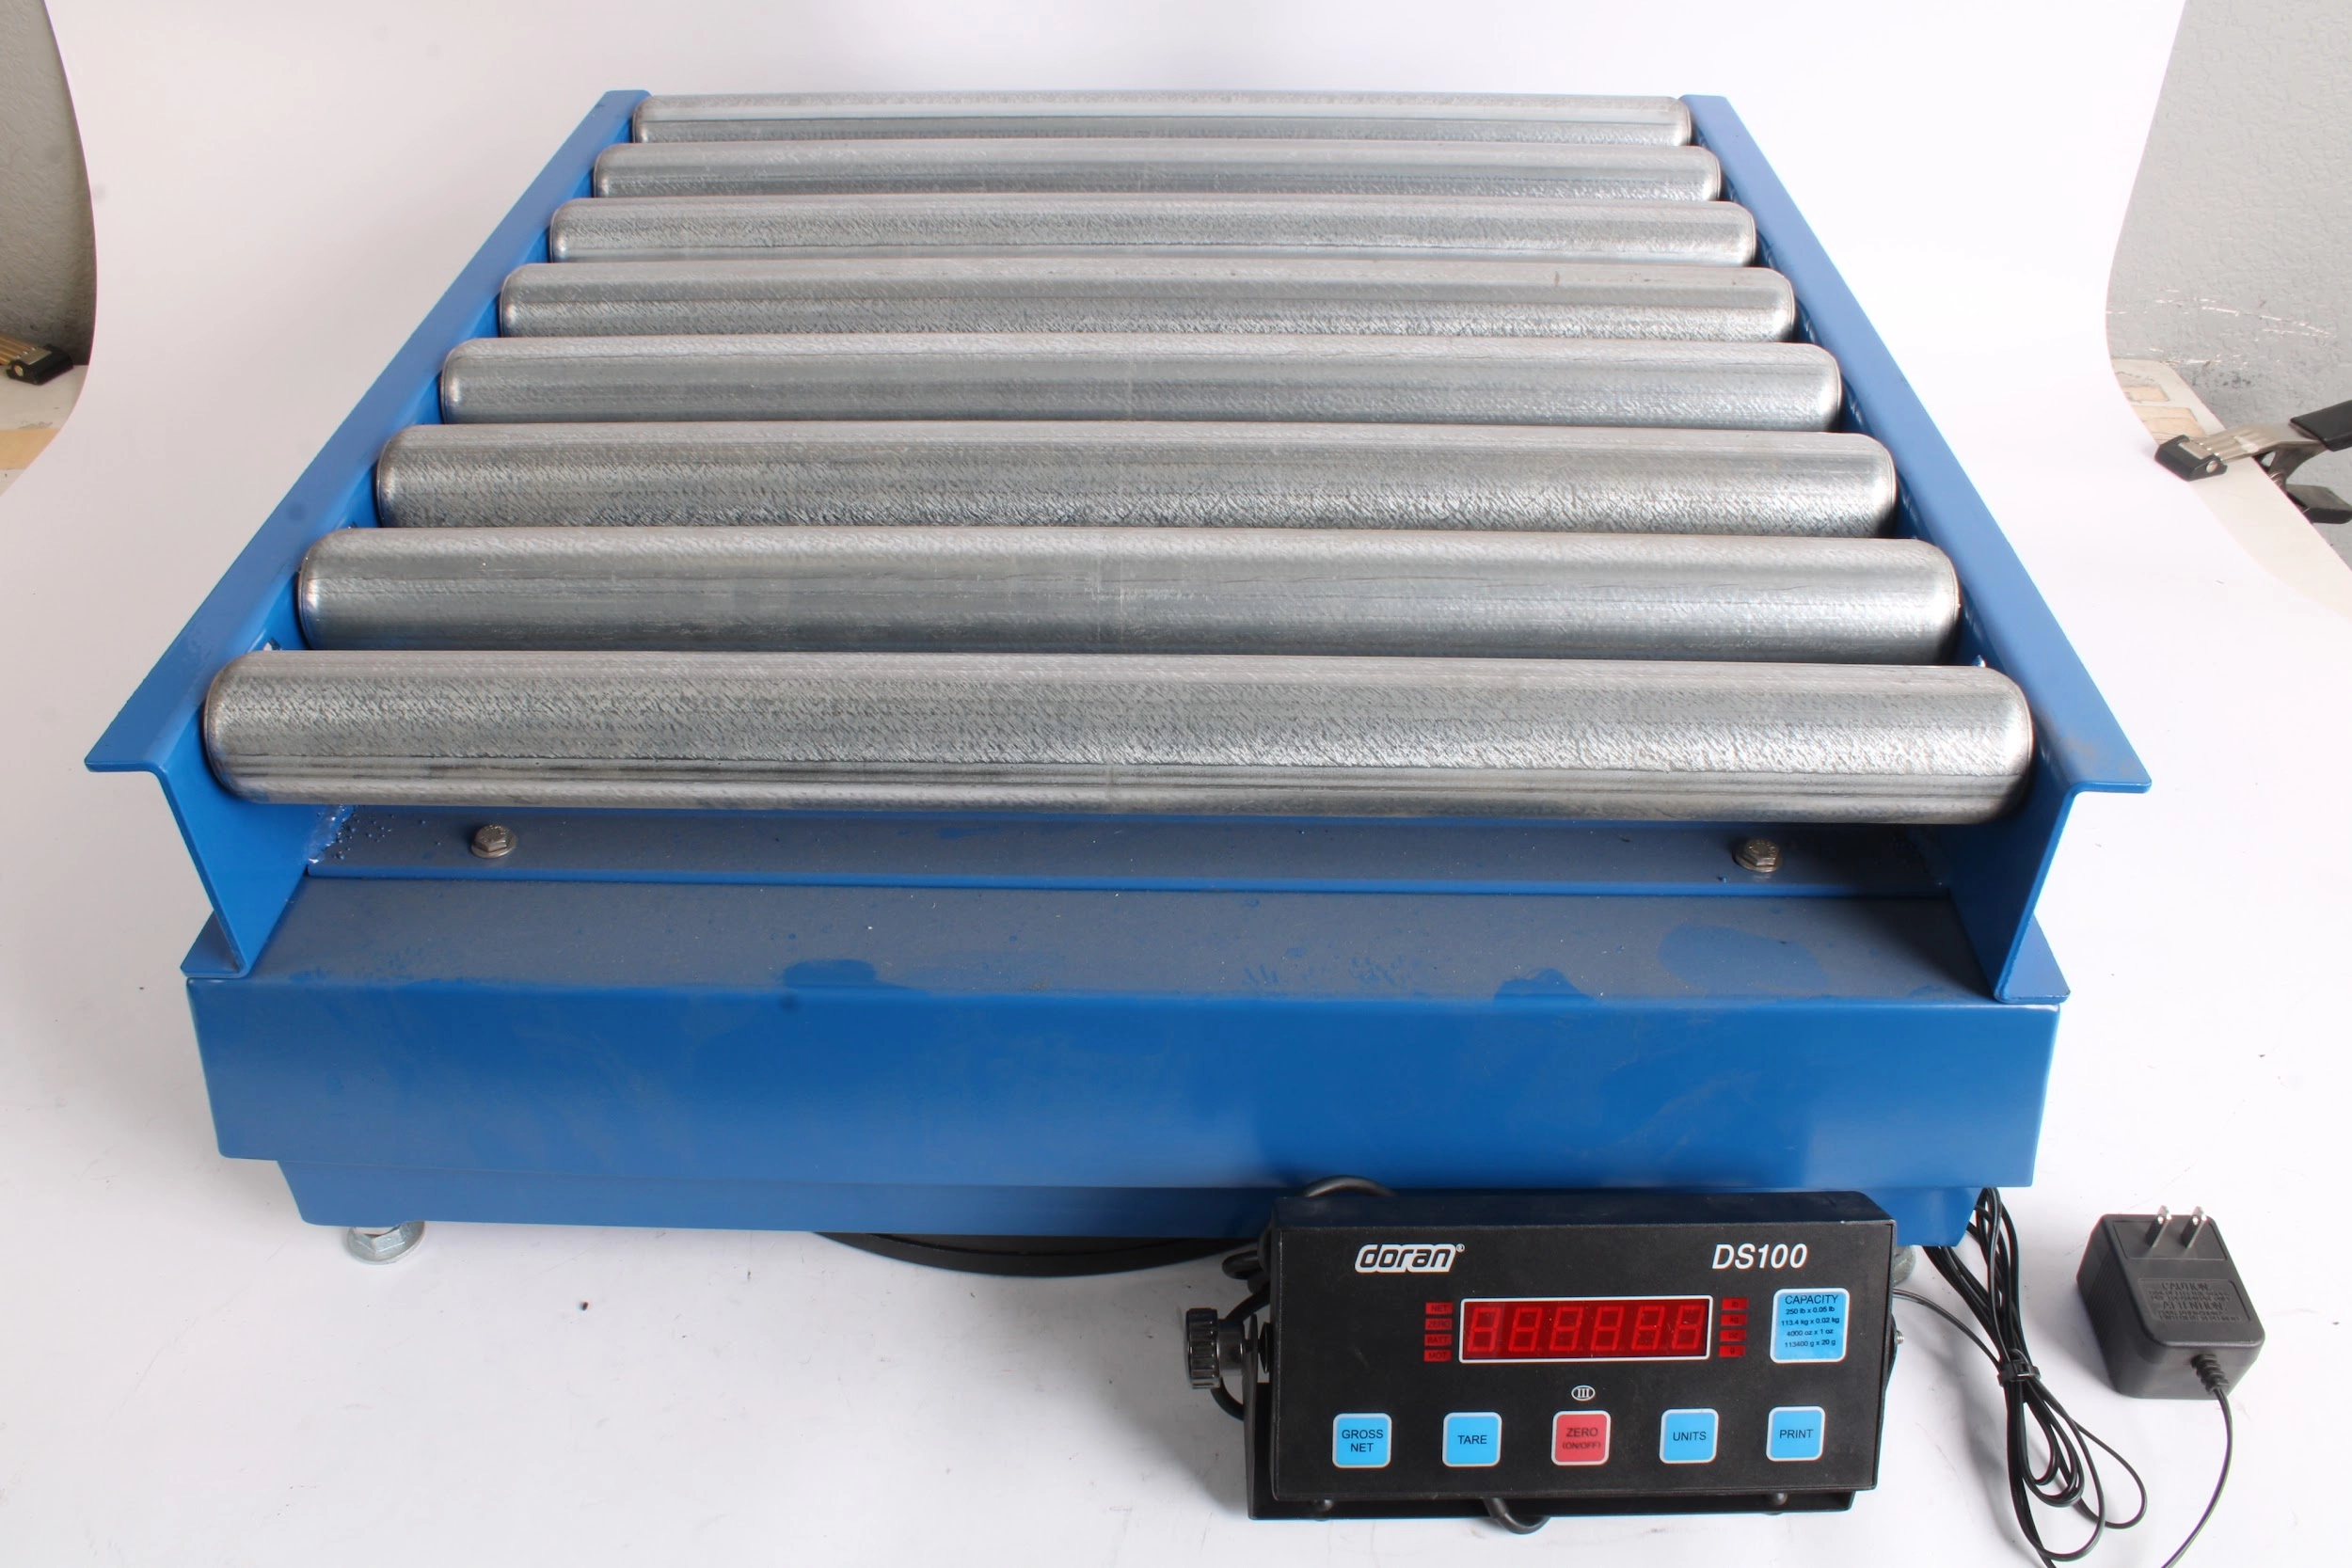 Doran DS100 Scale Indicator + DMS5250 Scale 250 Capacity + Conveyor Roller Table